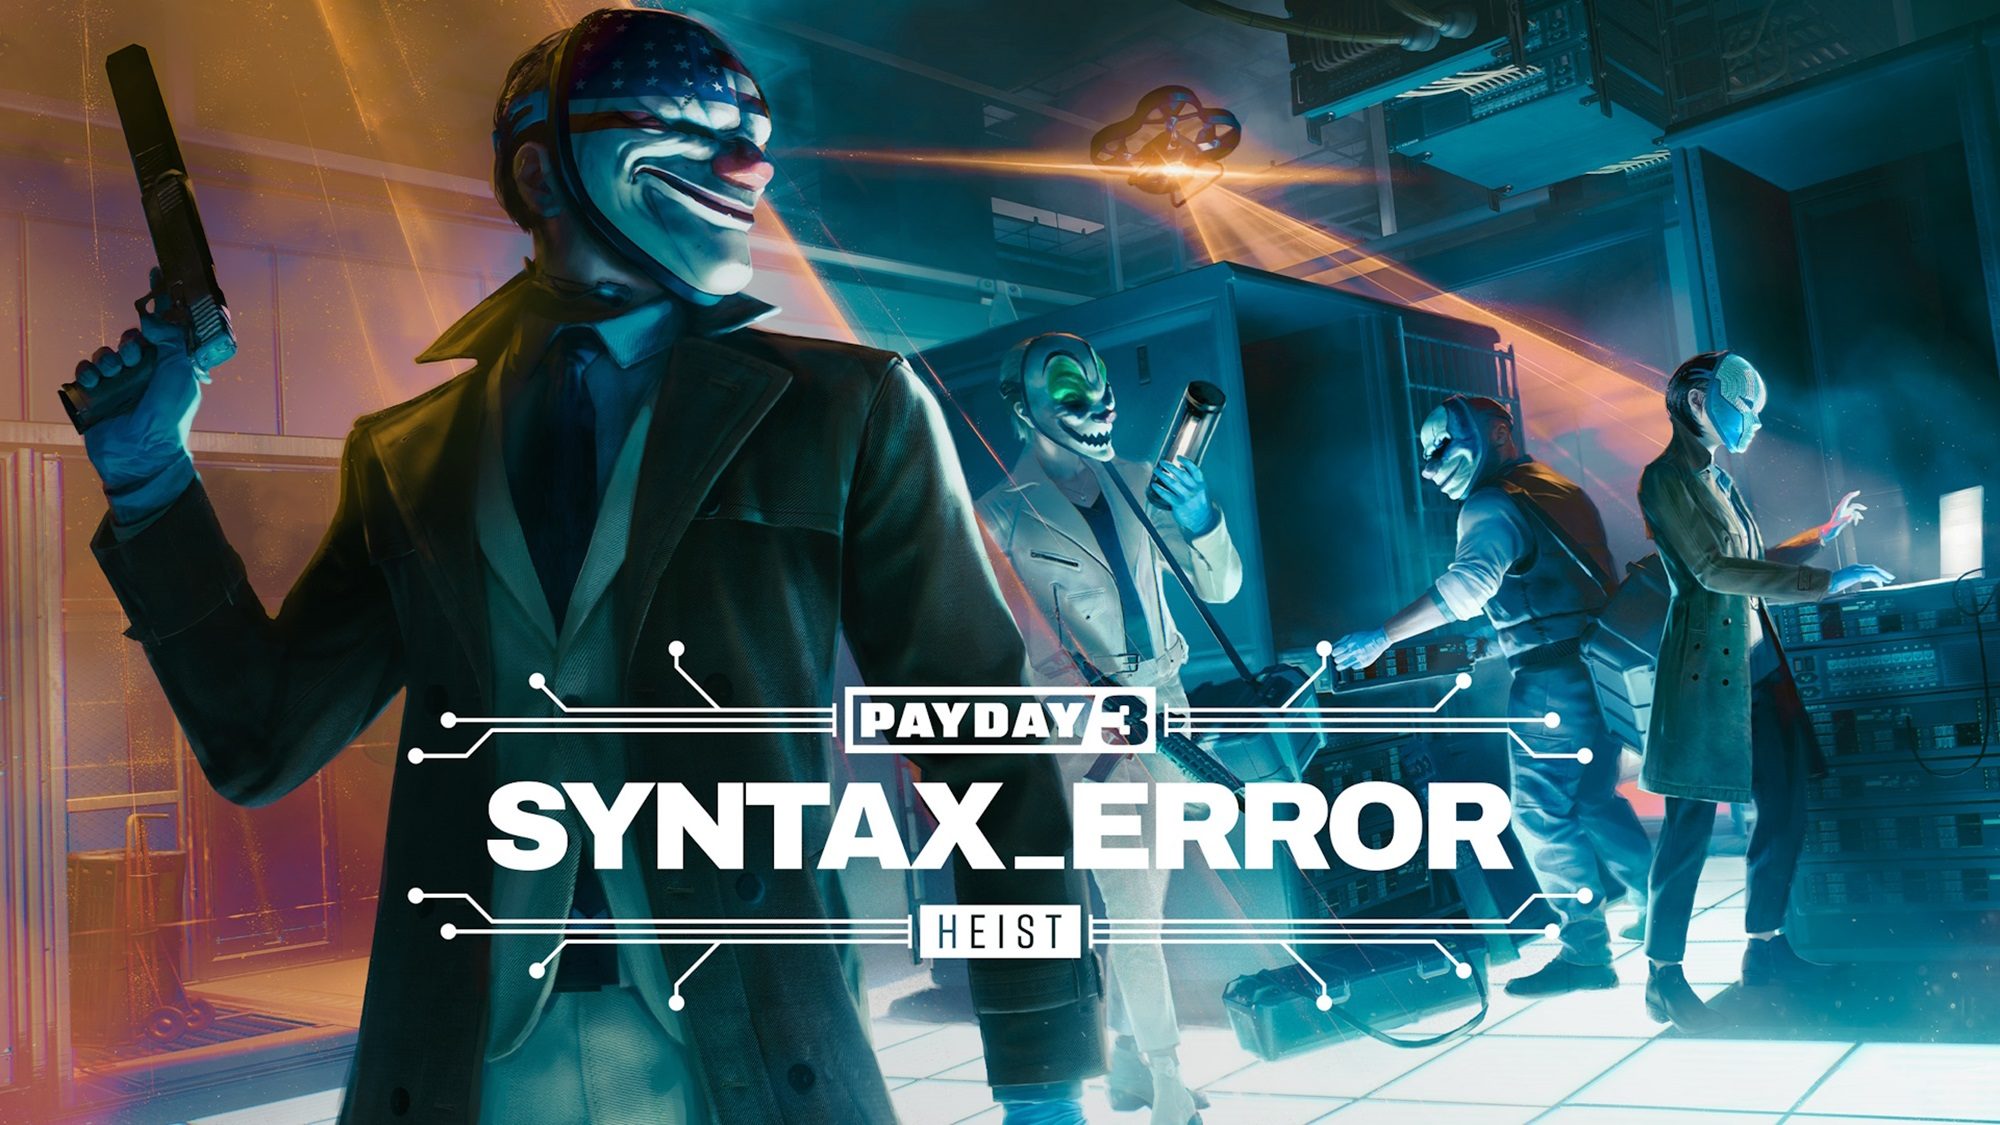 payday-3-chapter-1-syntax-error-has-been-released